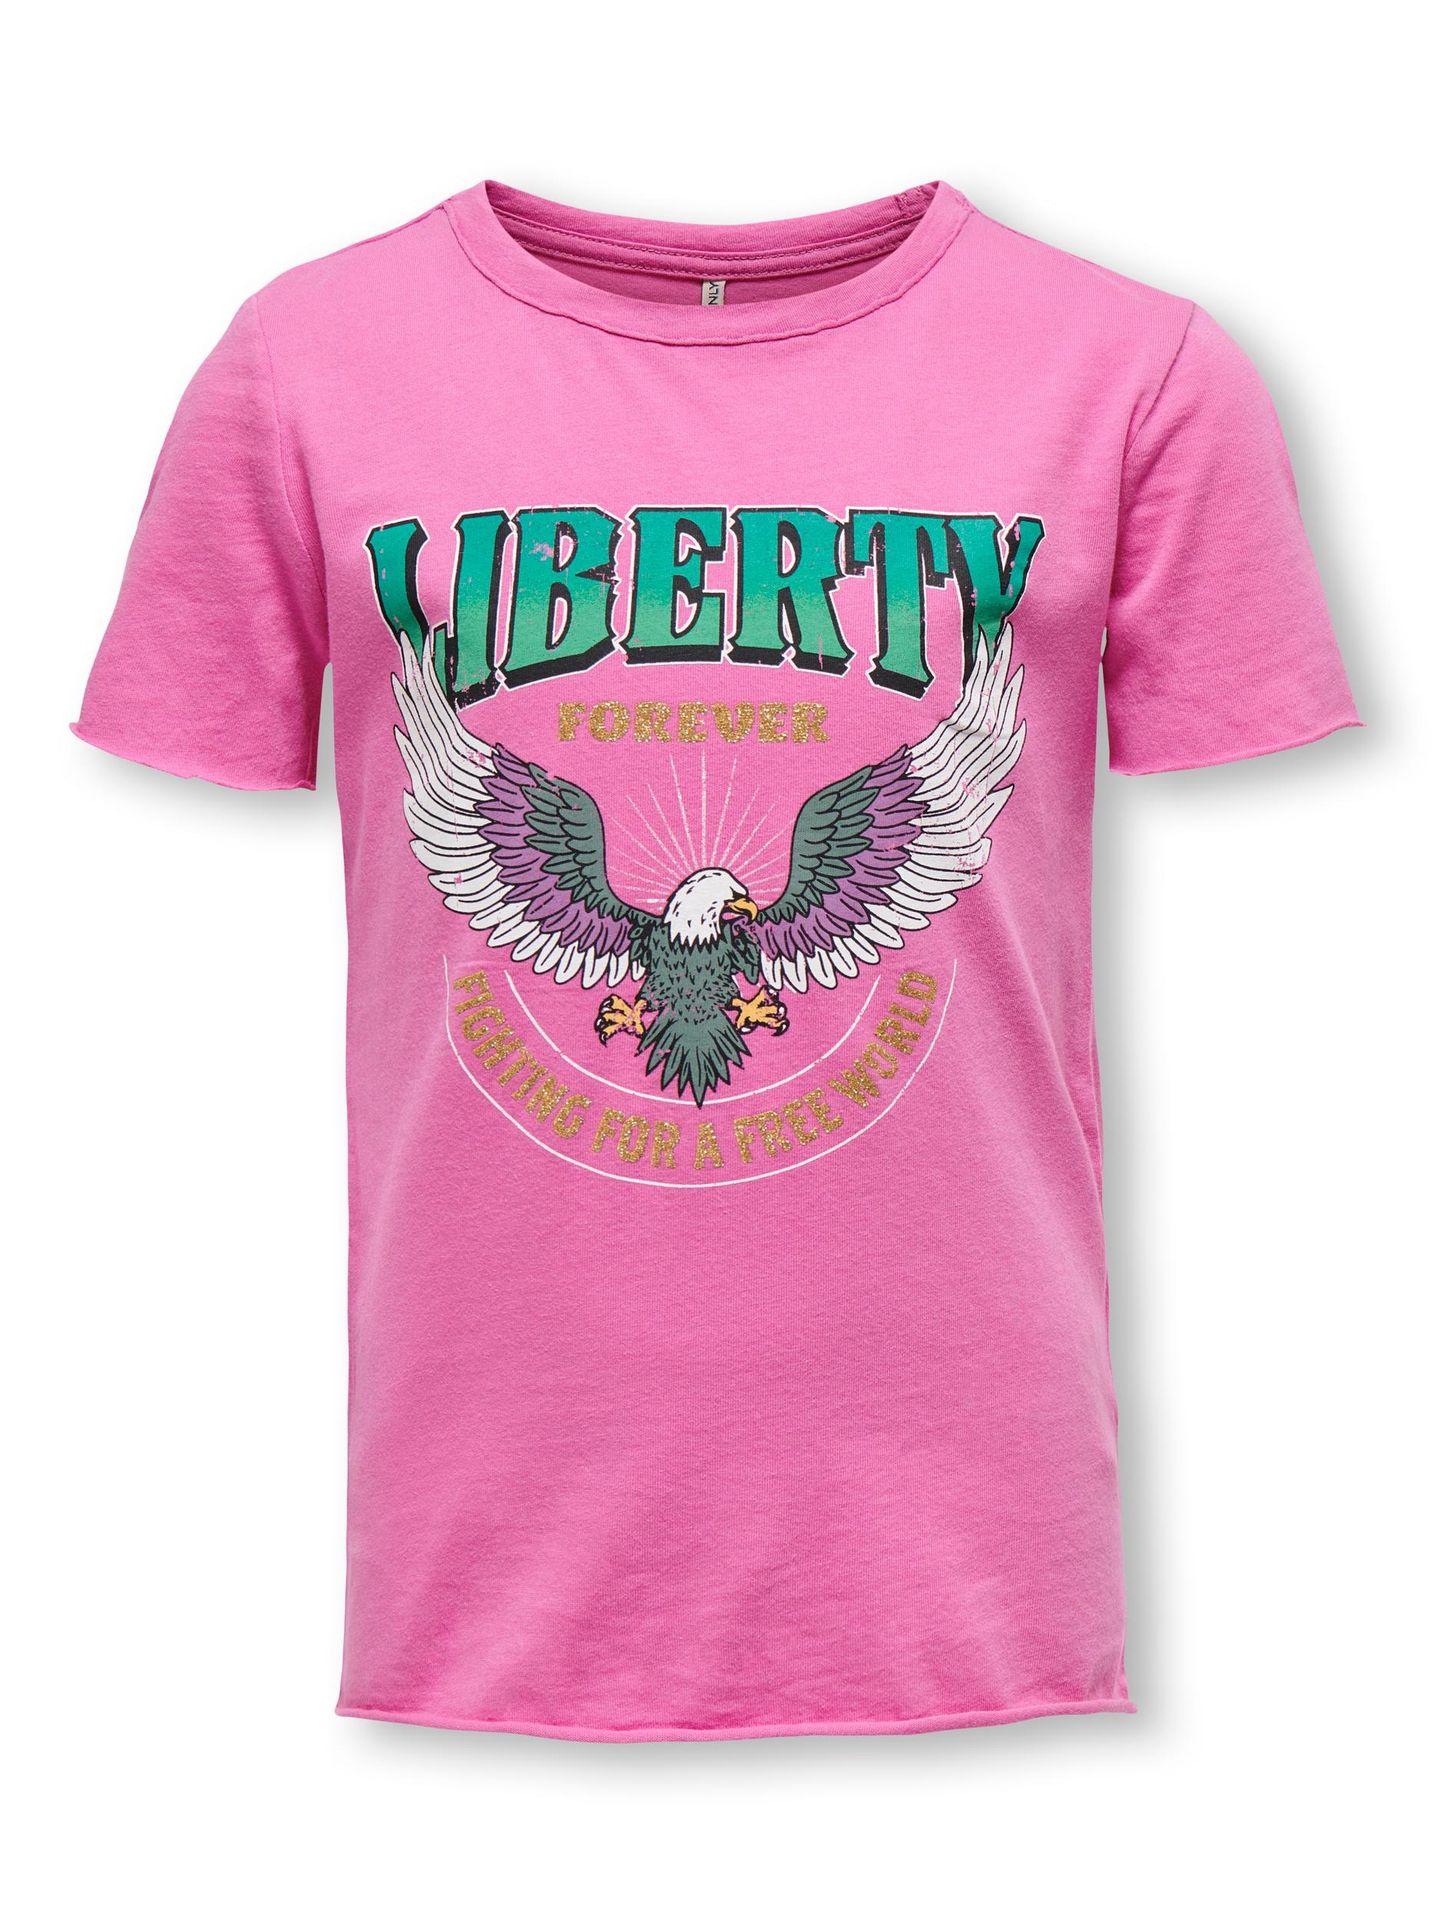 Kids Only KOGLUCY AWS/LIBERTY/VISION S/S FIT - Super Pink/LI Super Pink/Graphic glam 00096145-EKA26011400000927